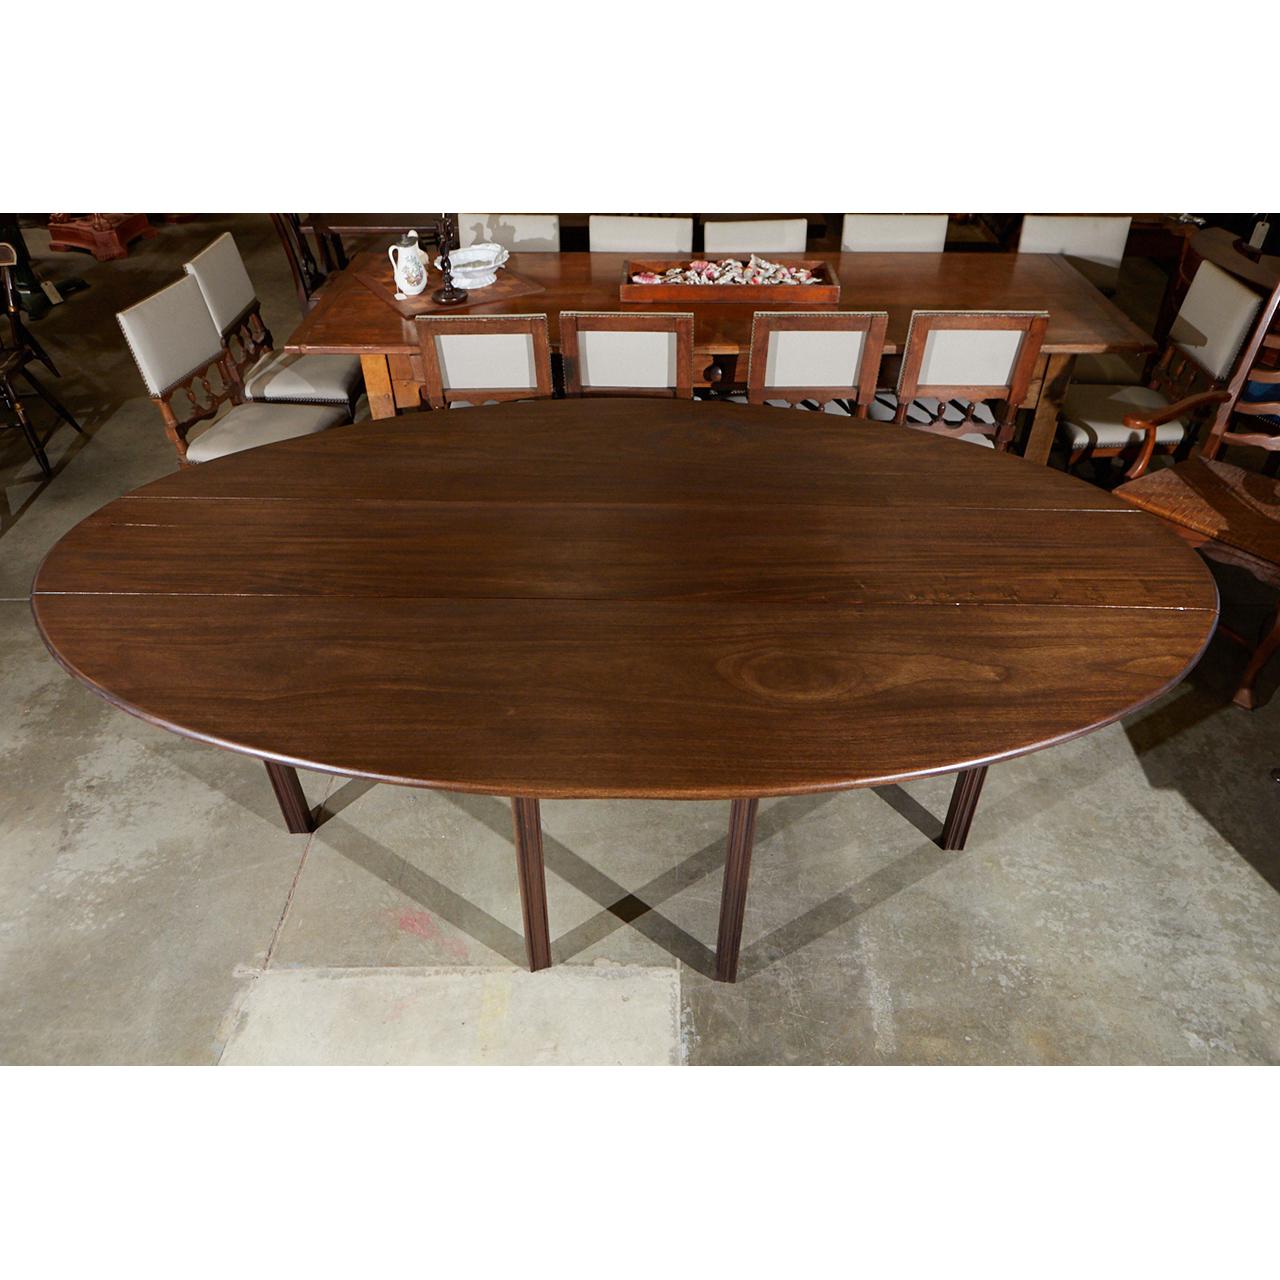 Mid-20th Century English Drop-Leaf Oval Dining Table